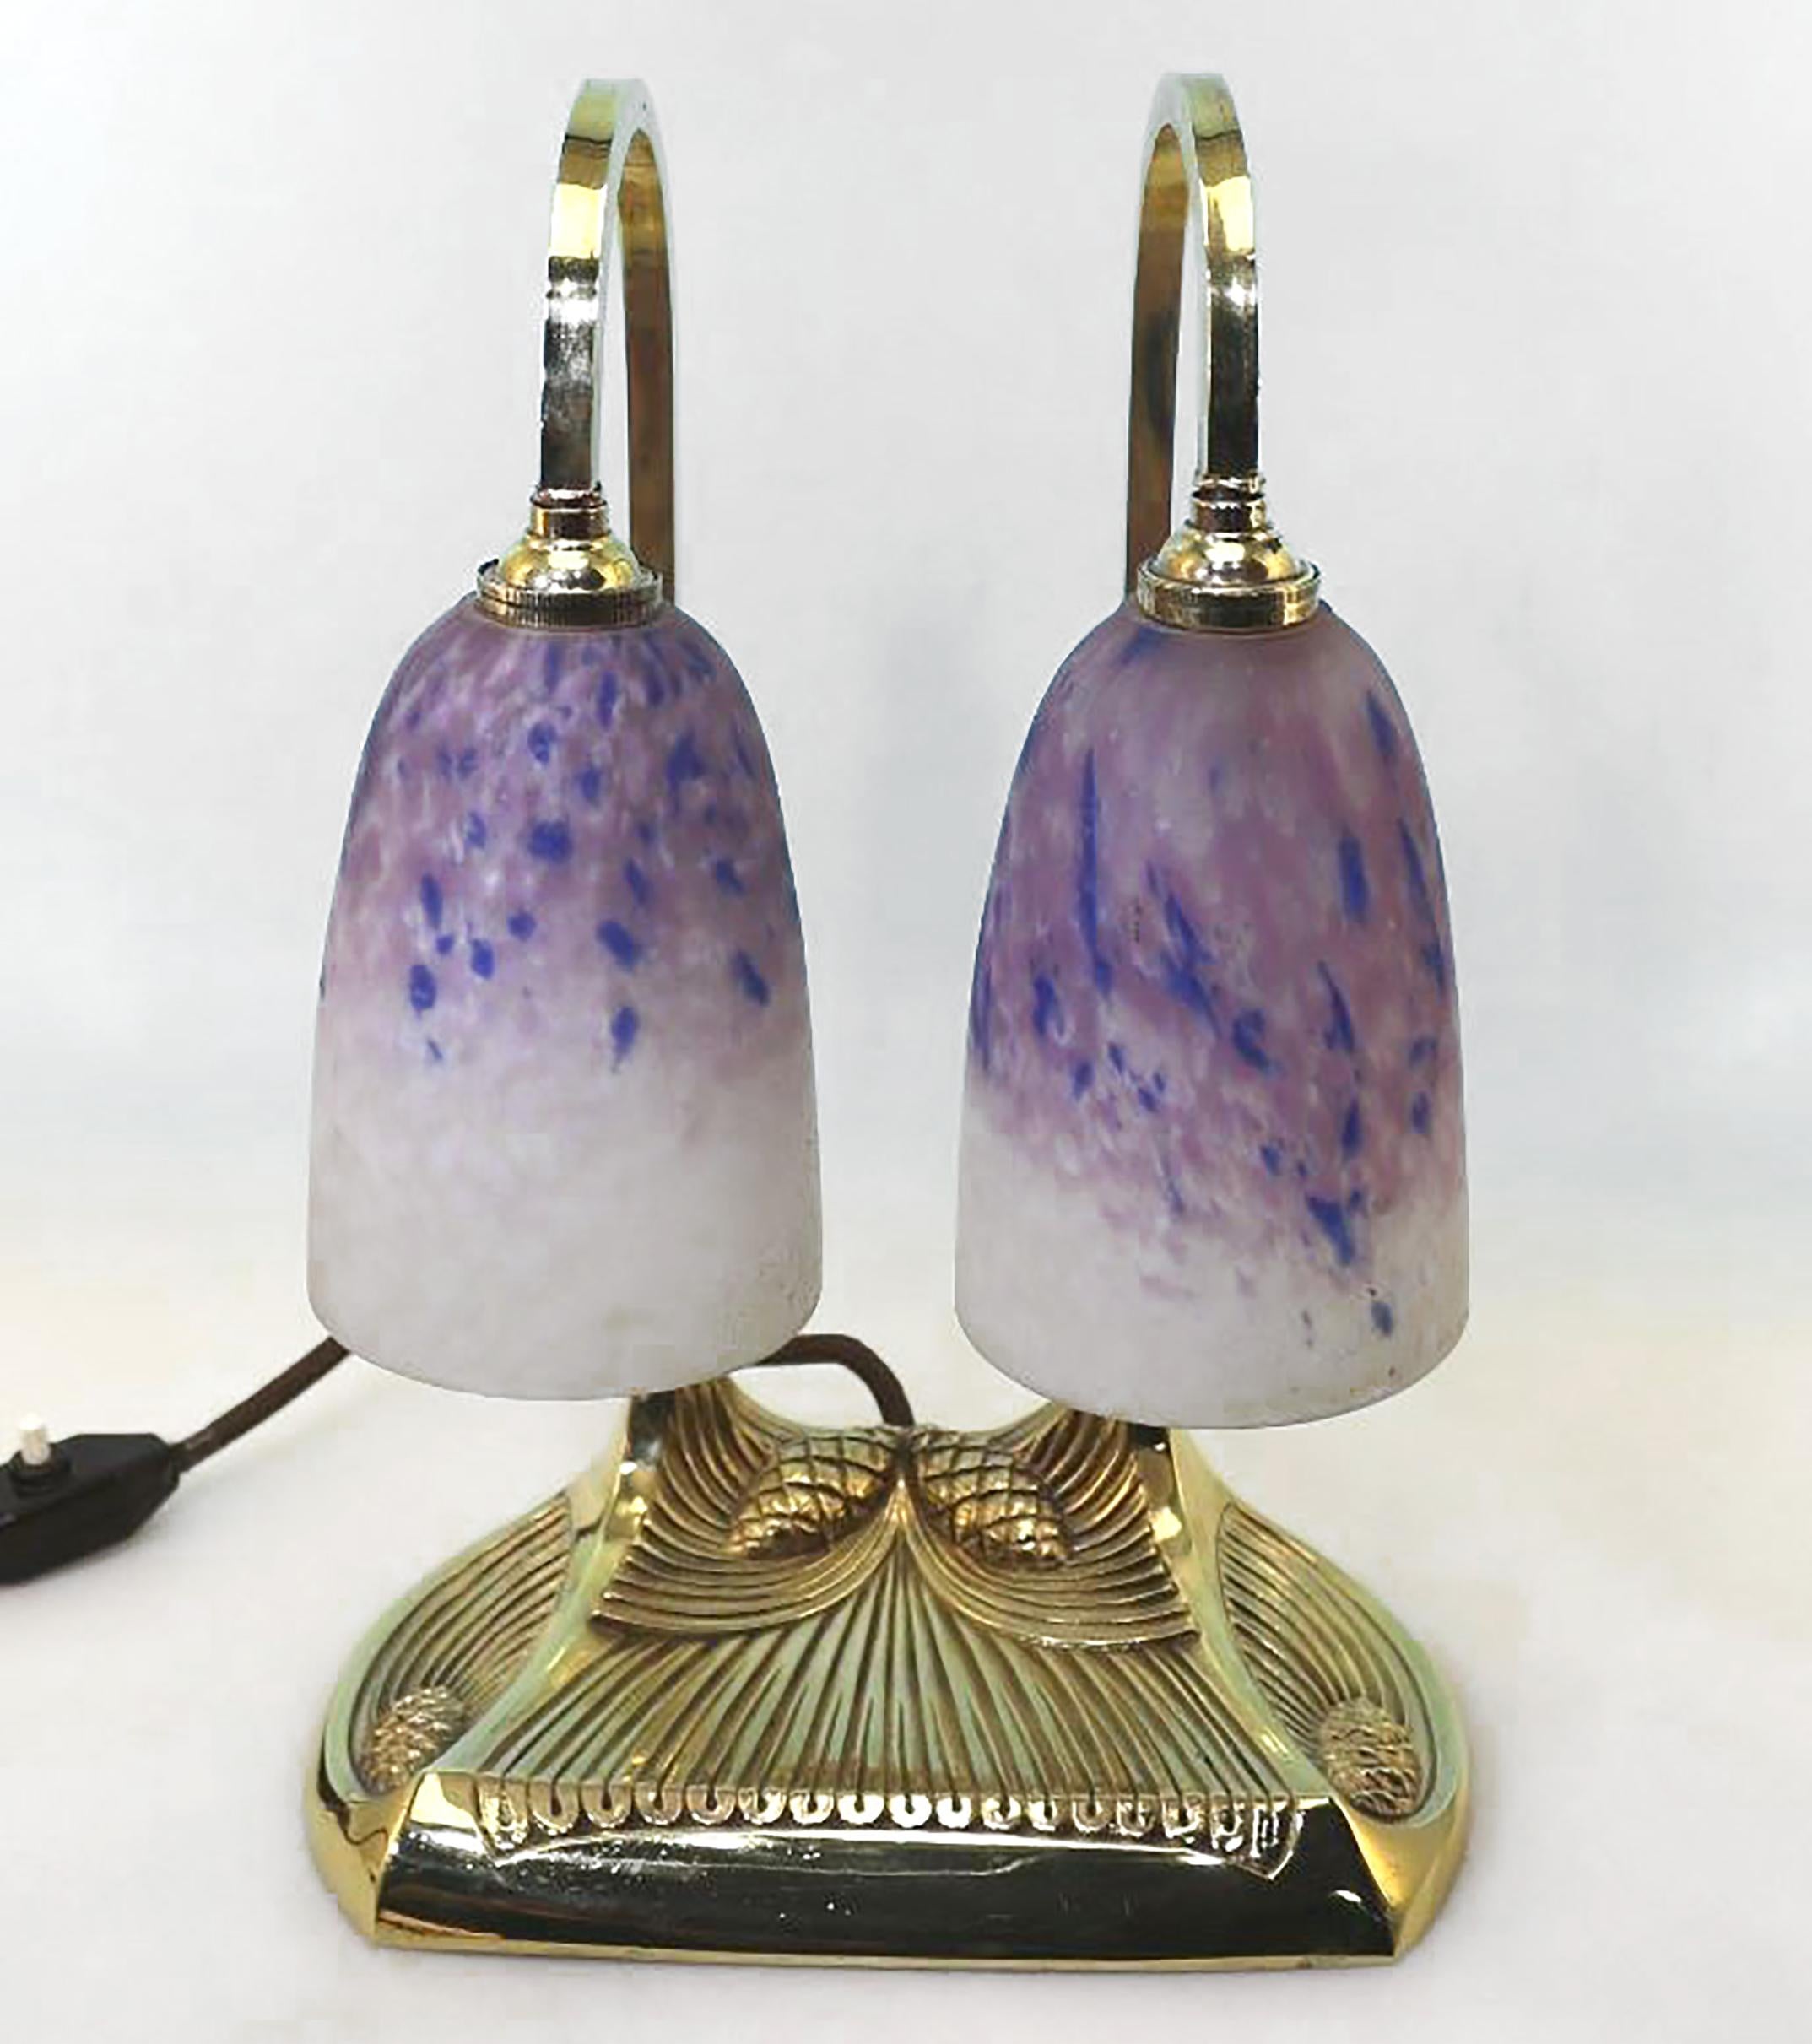 Signed bronze polished double lamp Schneider Pâte de verre glass, signed (Robert) BOUSQUET (1894-1917)

Lamp in the cone design, shades made of pâte de verre glass, signed on the side with an etching stamp, 